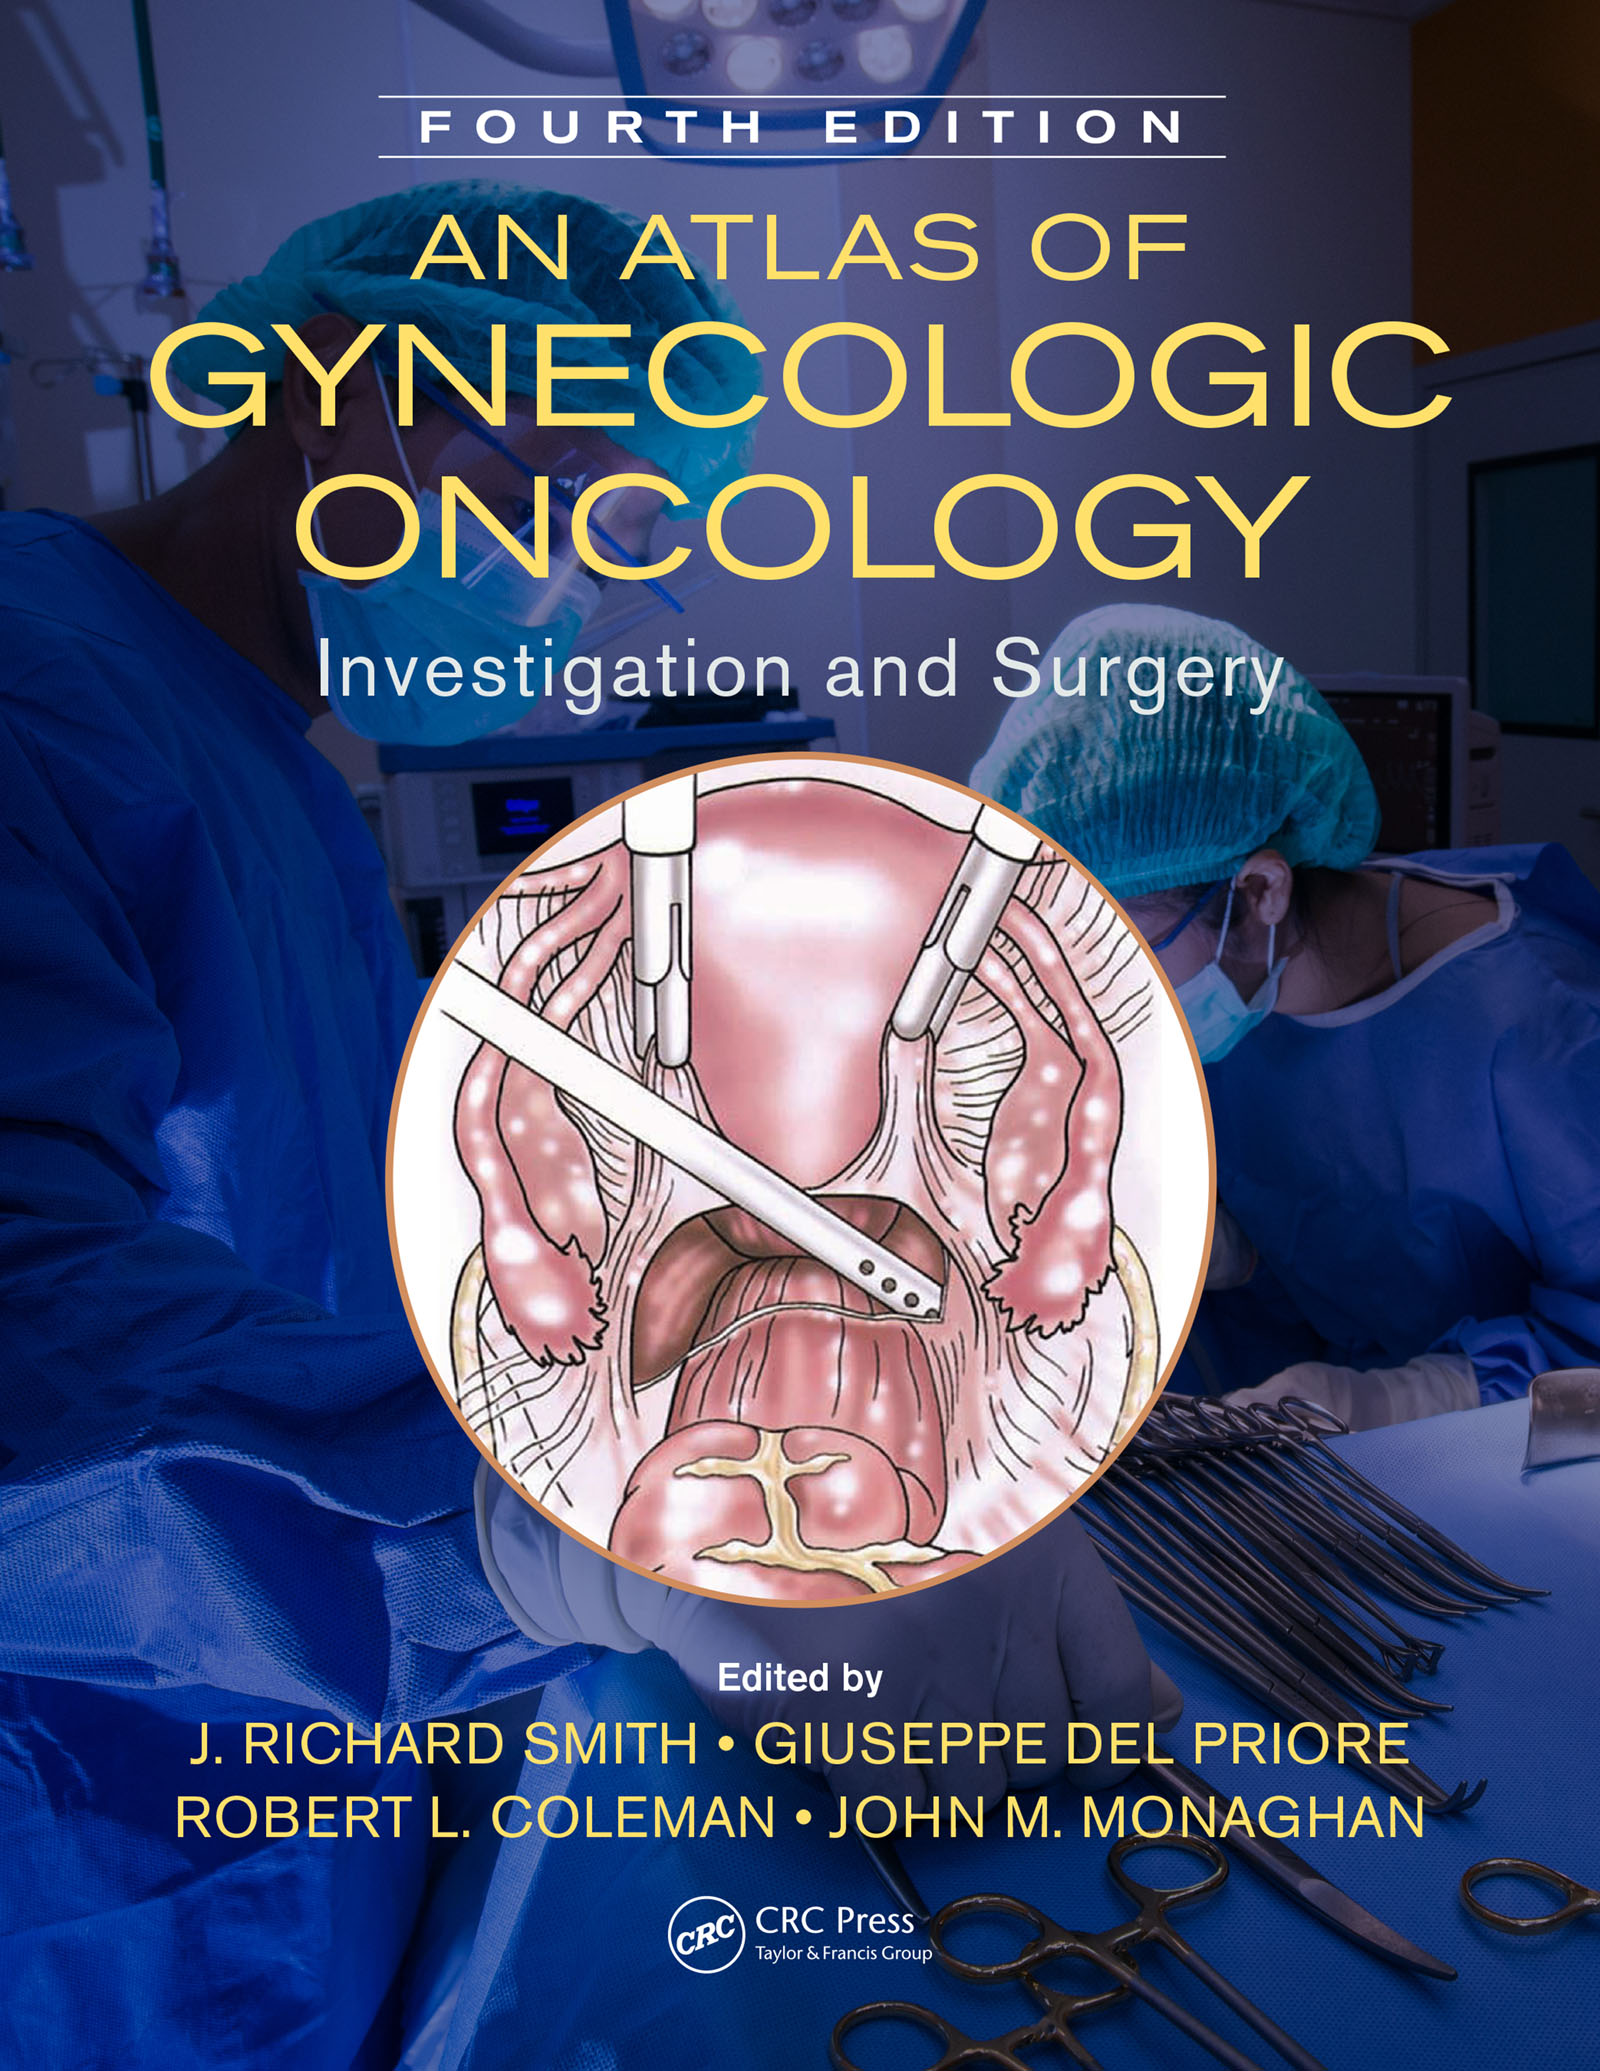 An Atlas of Gynecologic Oncology - Investigation and Surgery - خرید کتاب افست جراحی زنان اشراقیه